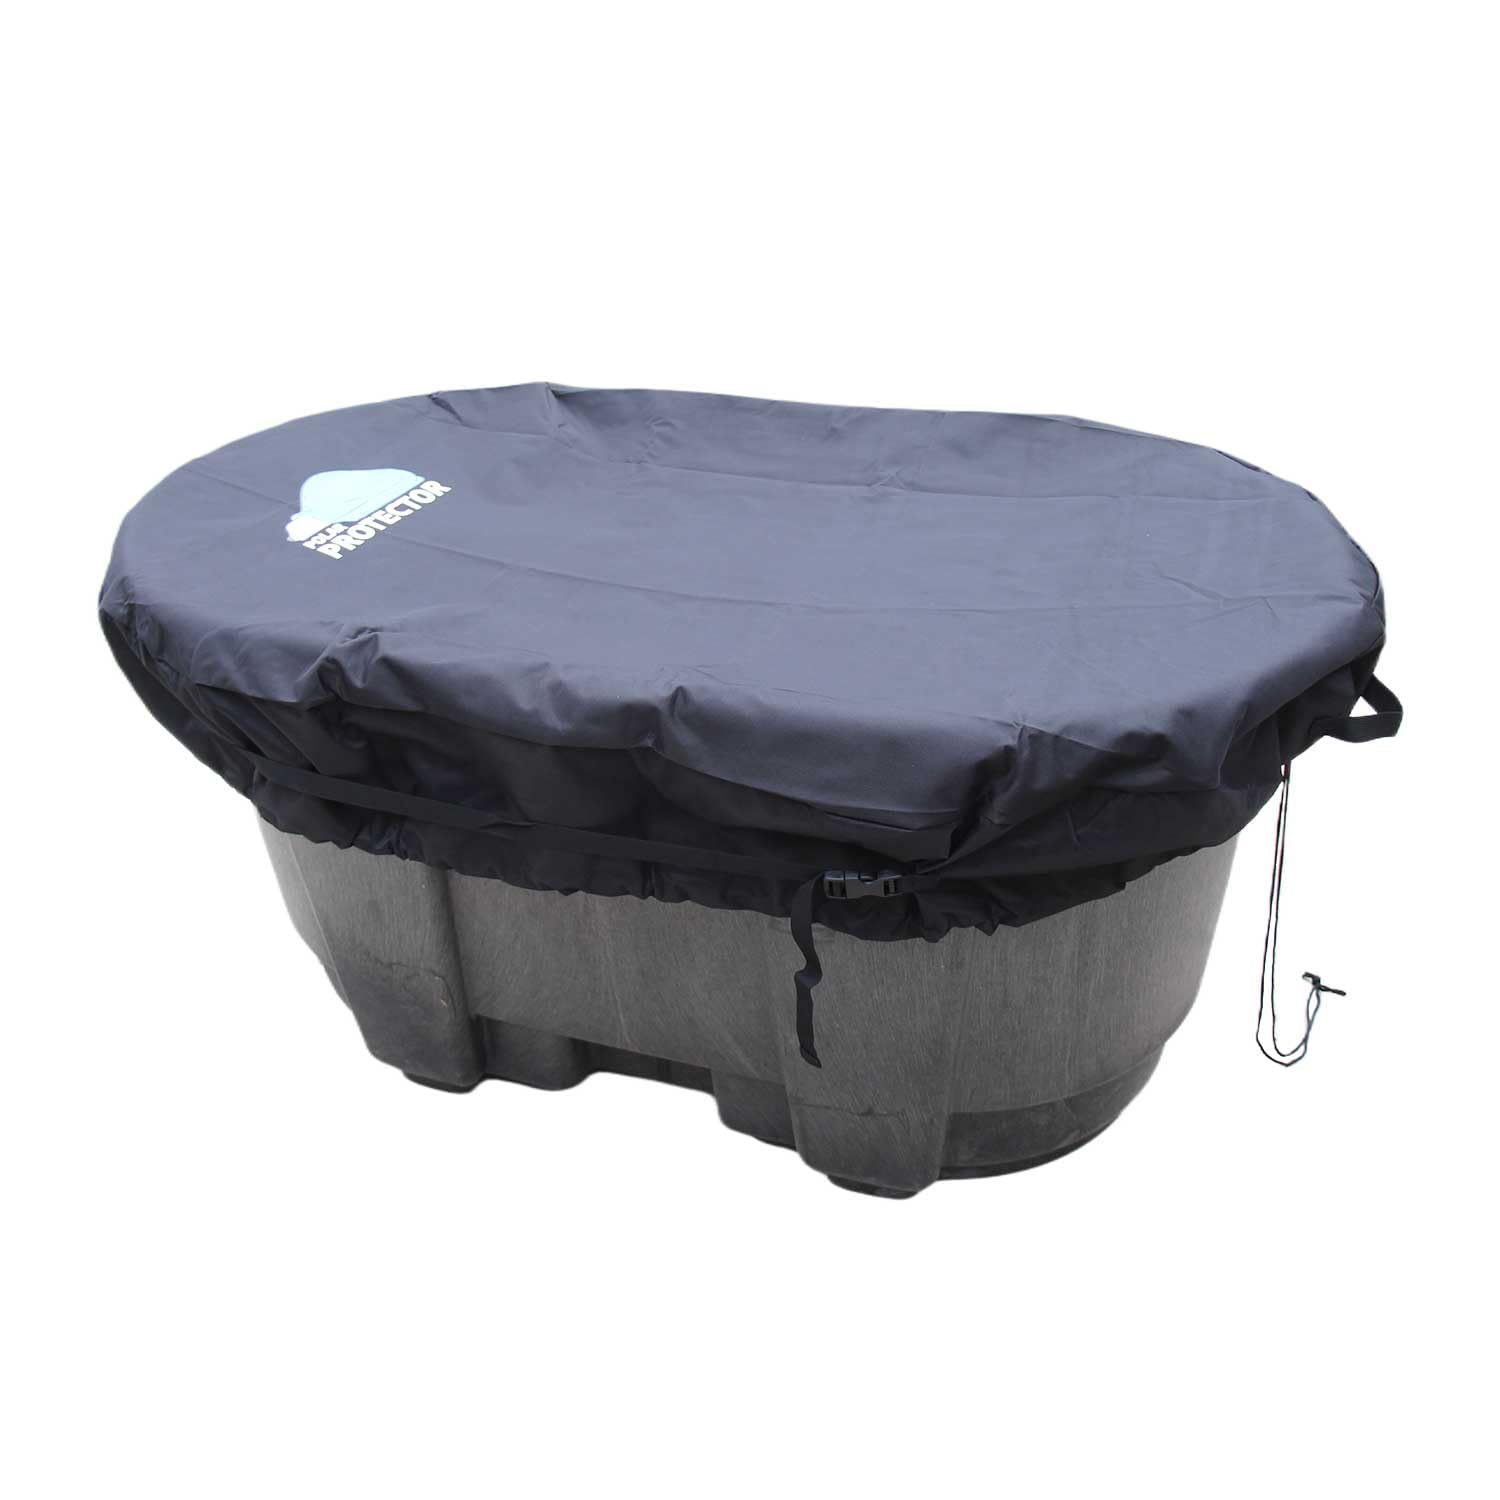 Polar Protector - 150 Gallon Oval Stock Tank Cover Ice Water Therapy Ice Bath Cover Cold Water Cover 150 Gallon Oval Stock Tank Waterproof Rip Proof Tough Keeps Tanks Clean